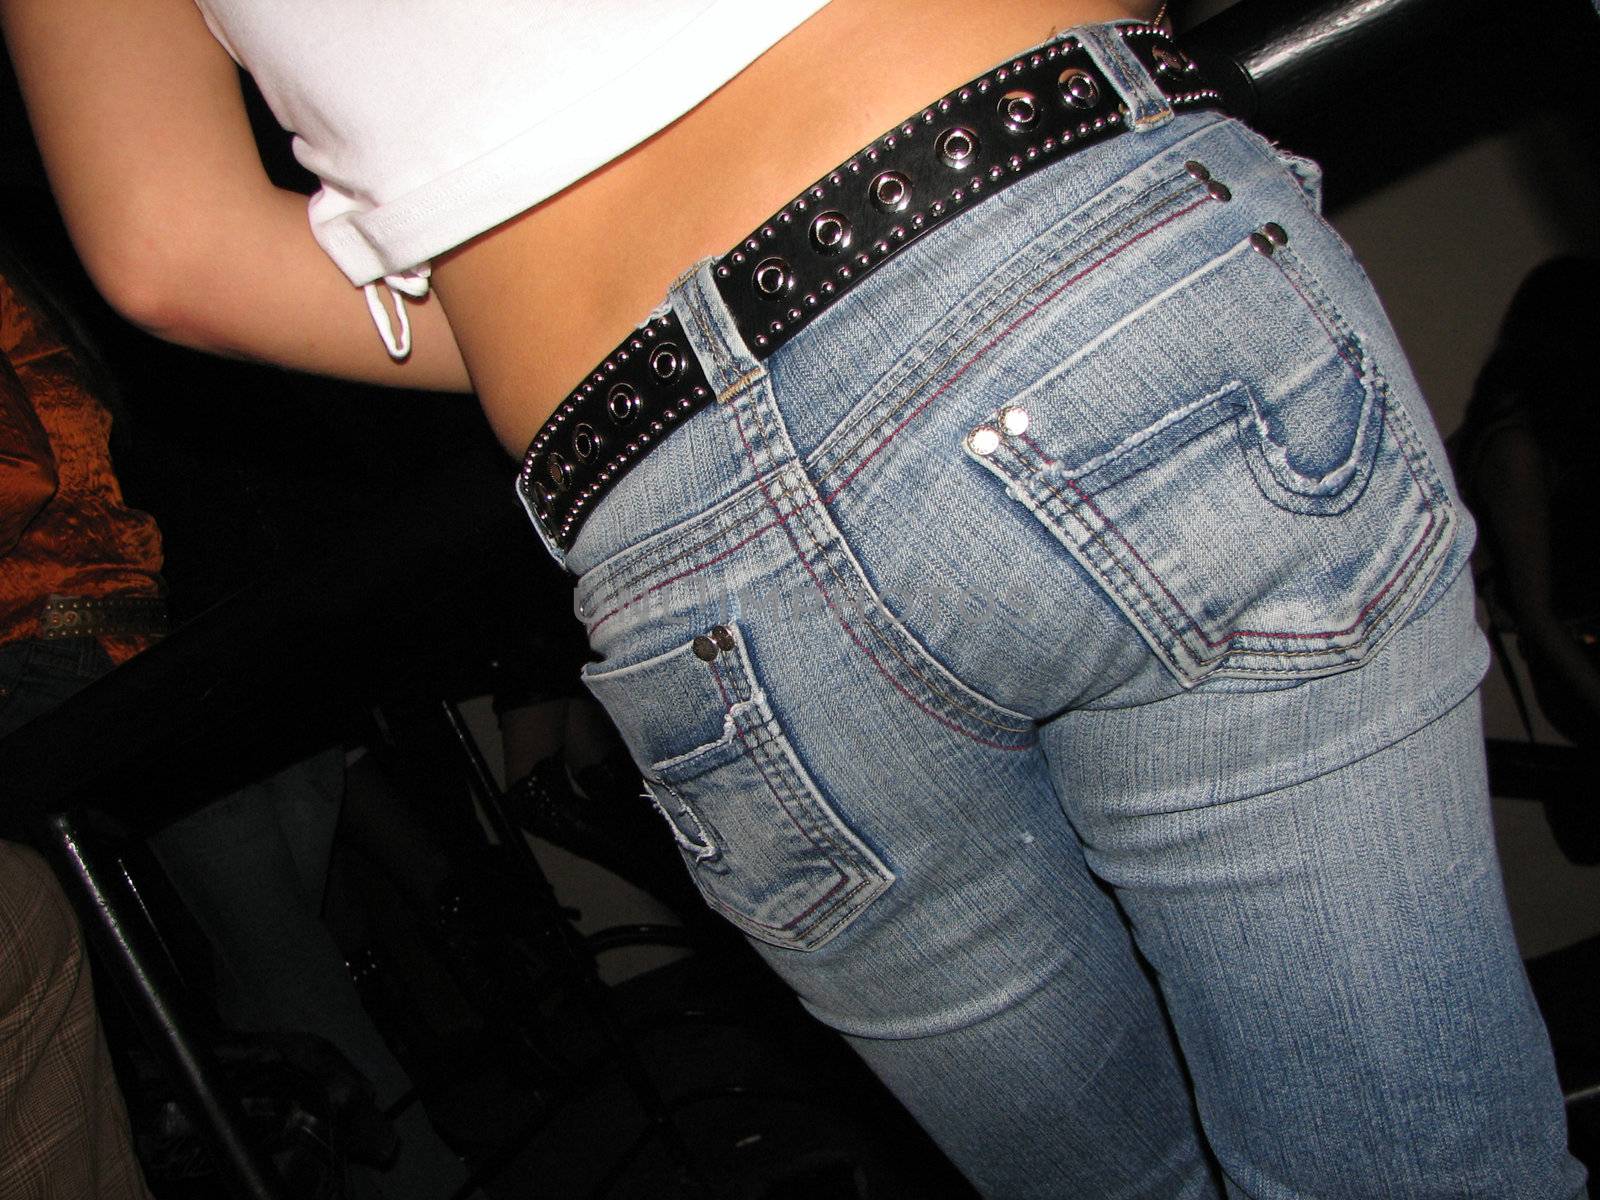 Rump attractive young girl in blue jeans